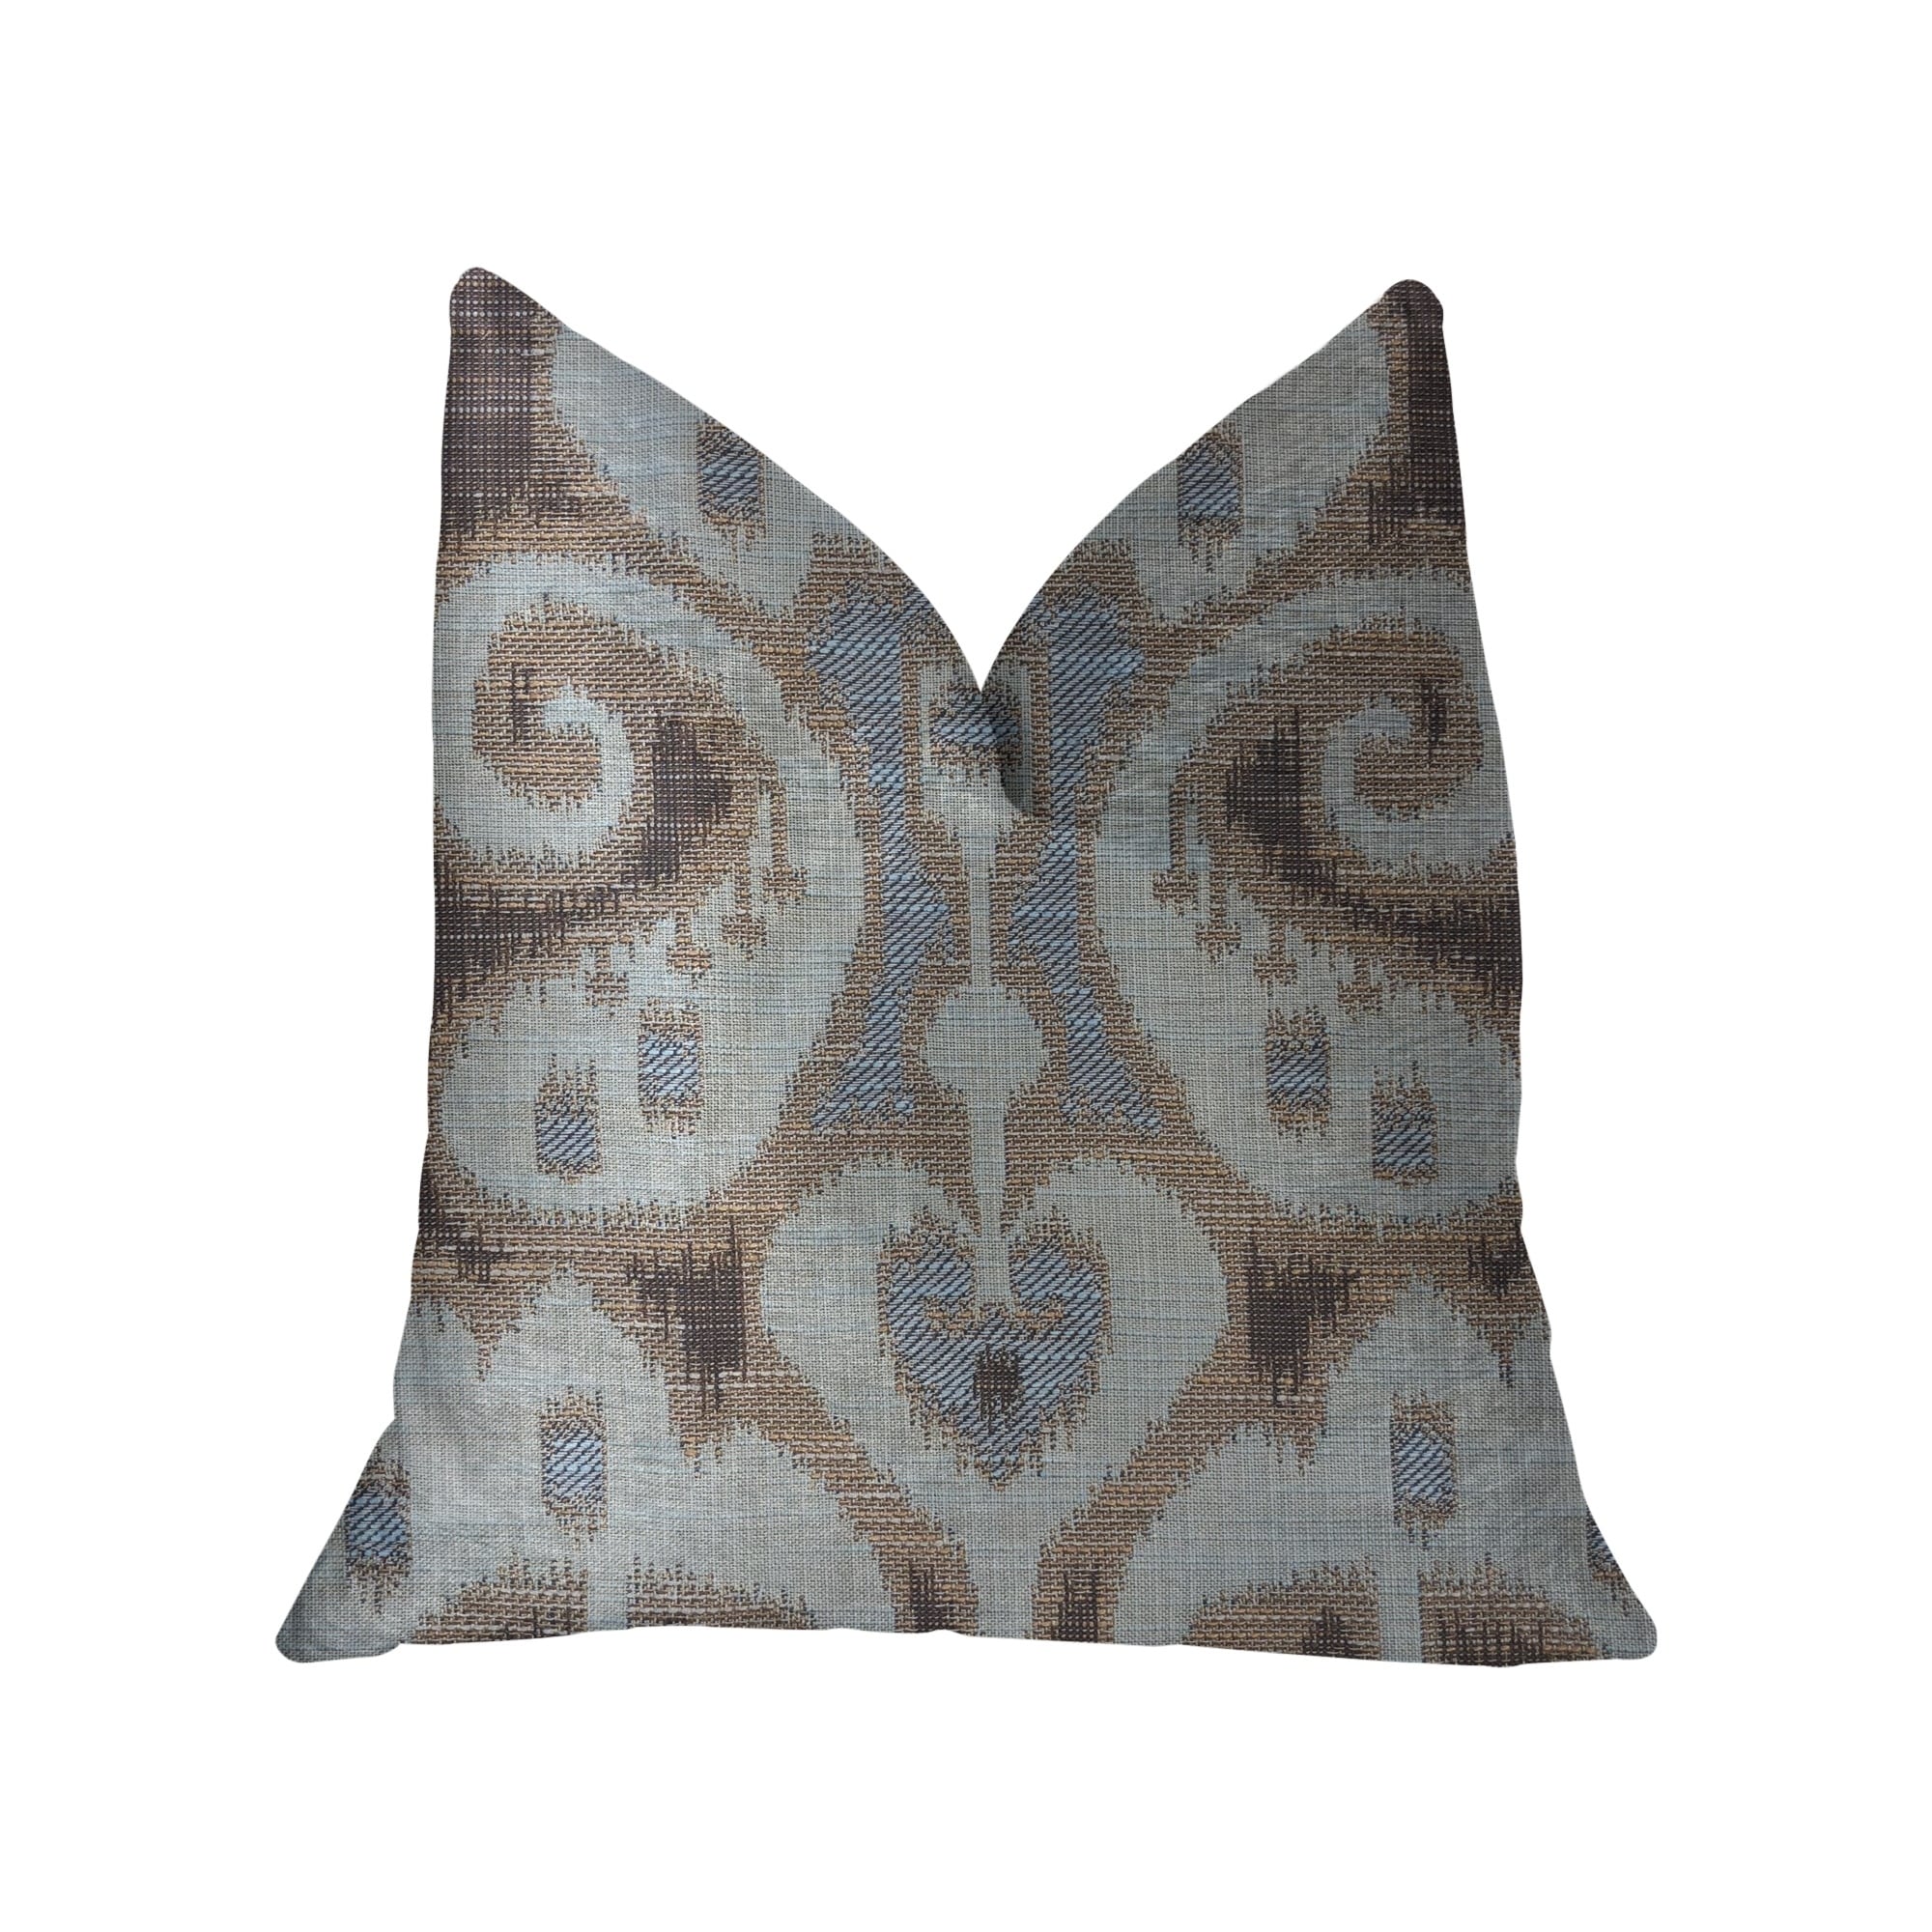 Plutus Brands Blue Plutus Hidden Park Medallion Luxury Throw Pillow 22 in x 22in Double Sided 22 x 22 